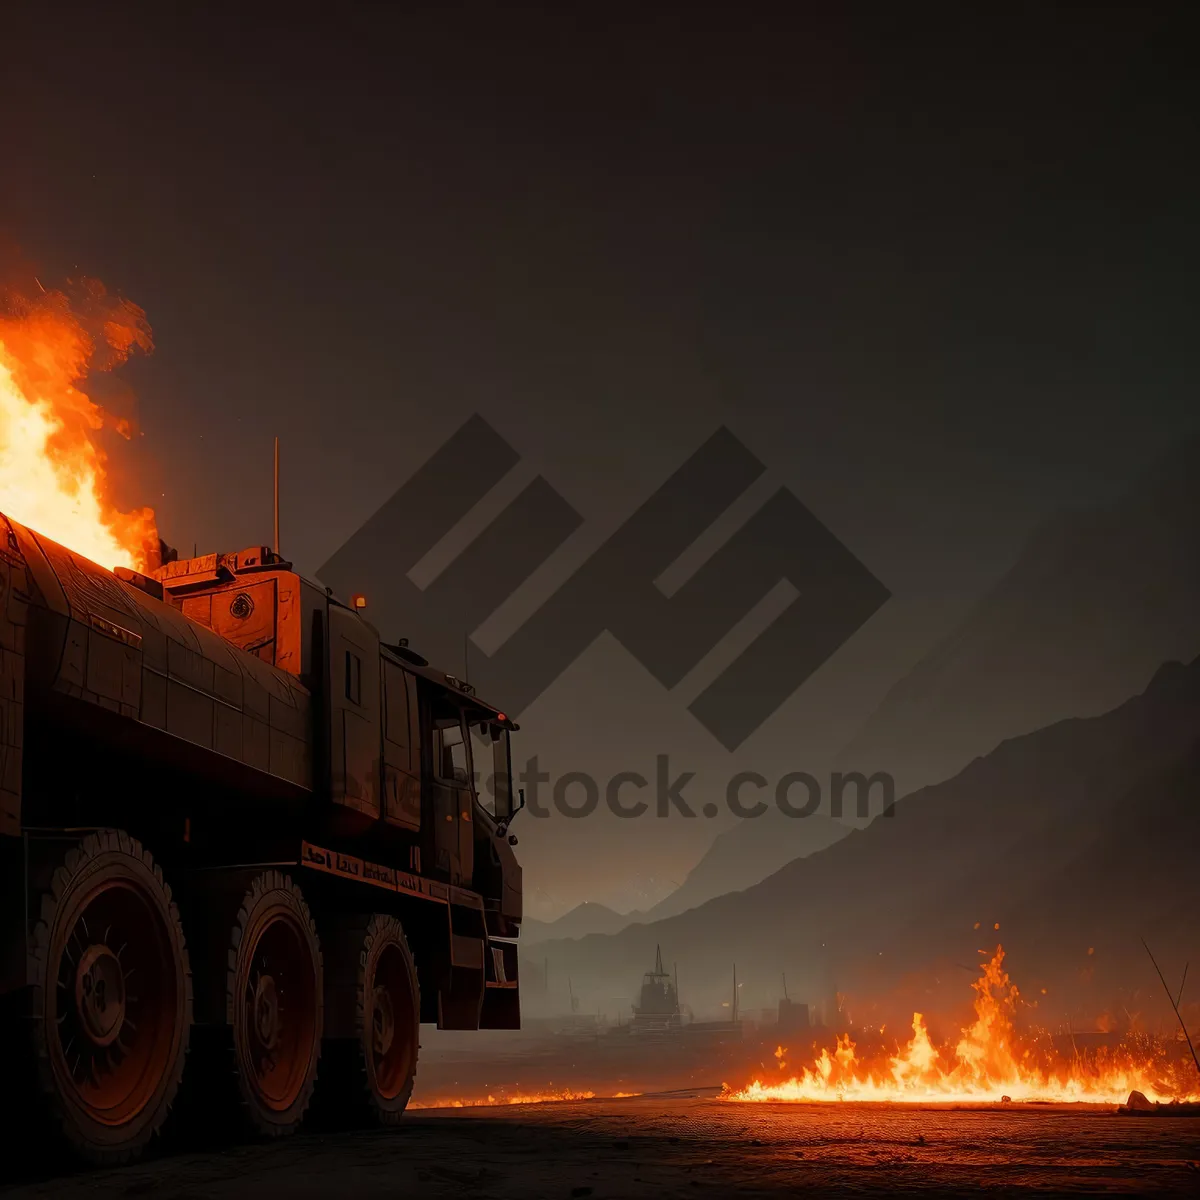 Picture of Trailer under Fiery Sunset Sky